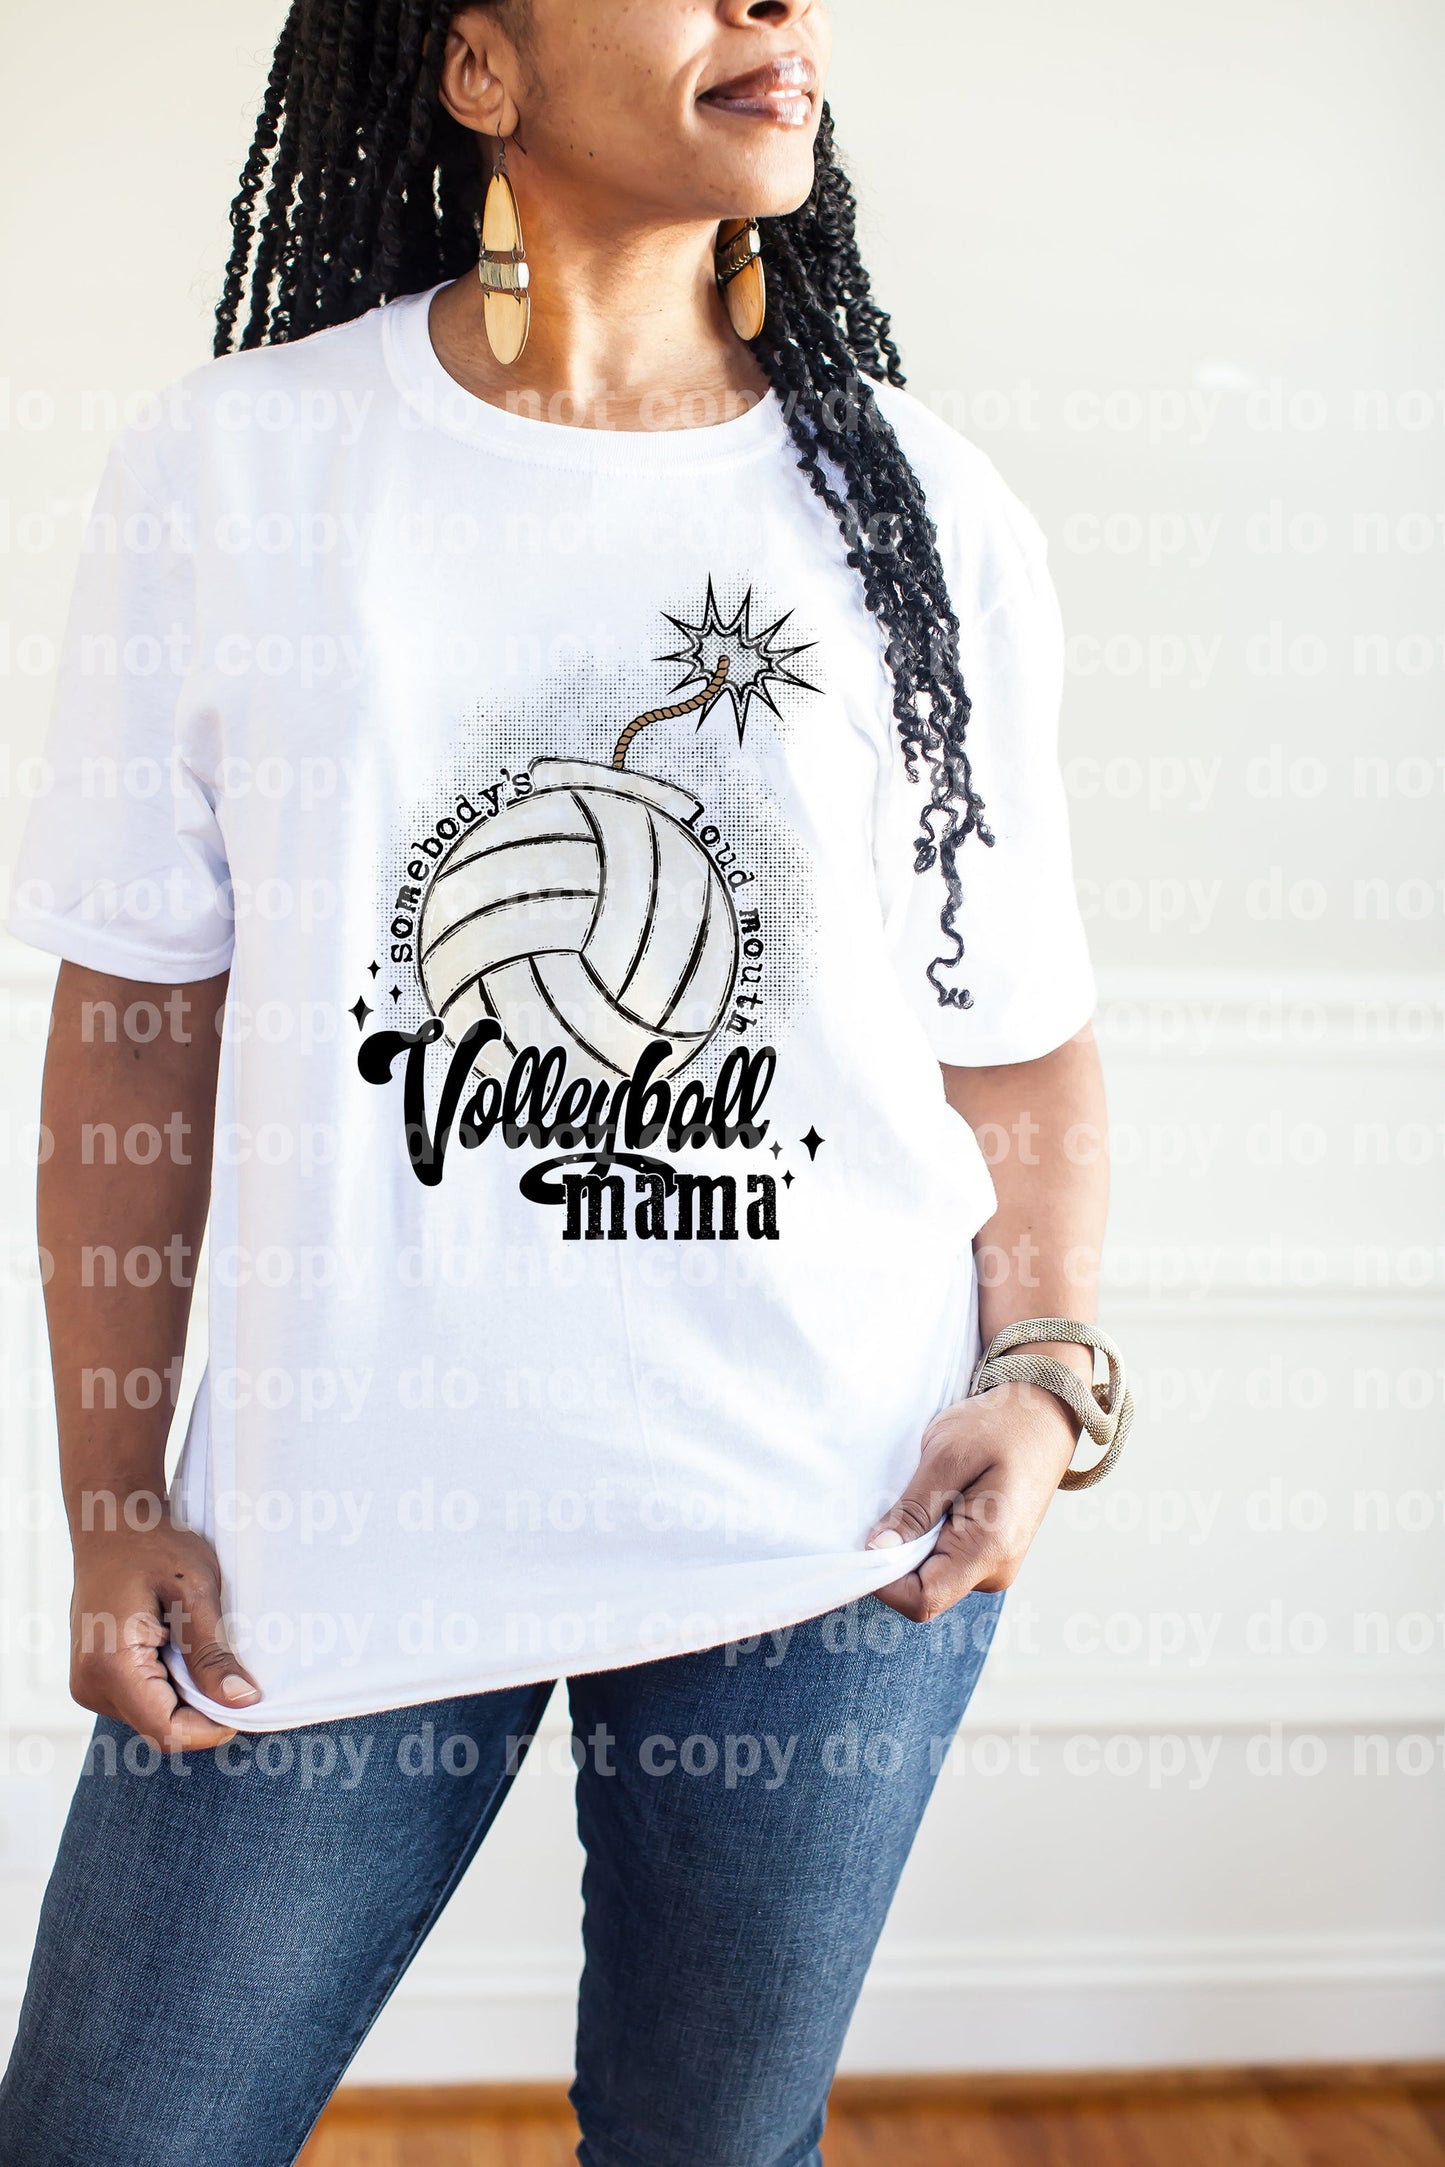 Somebody's Loud Mouth Volleyball Mama Dream Print or Sublimation Print